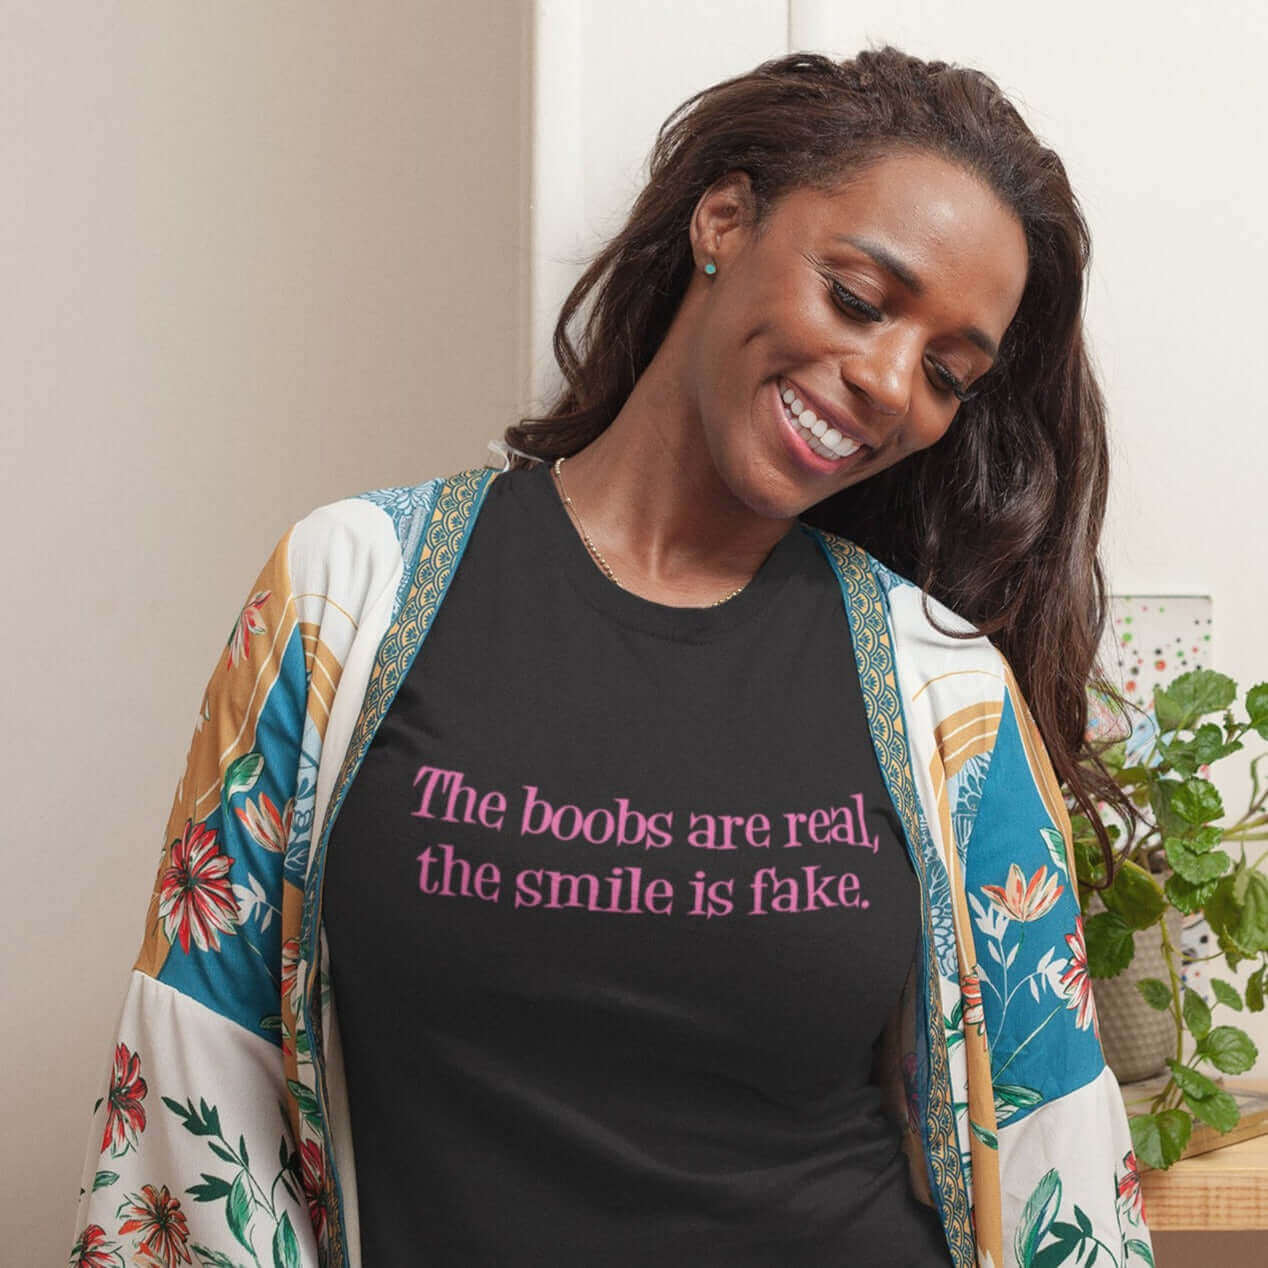 Smiling woman wearing a black t-shirt with the phrase The boobs are real, the smile is fake printed in pink on the front.